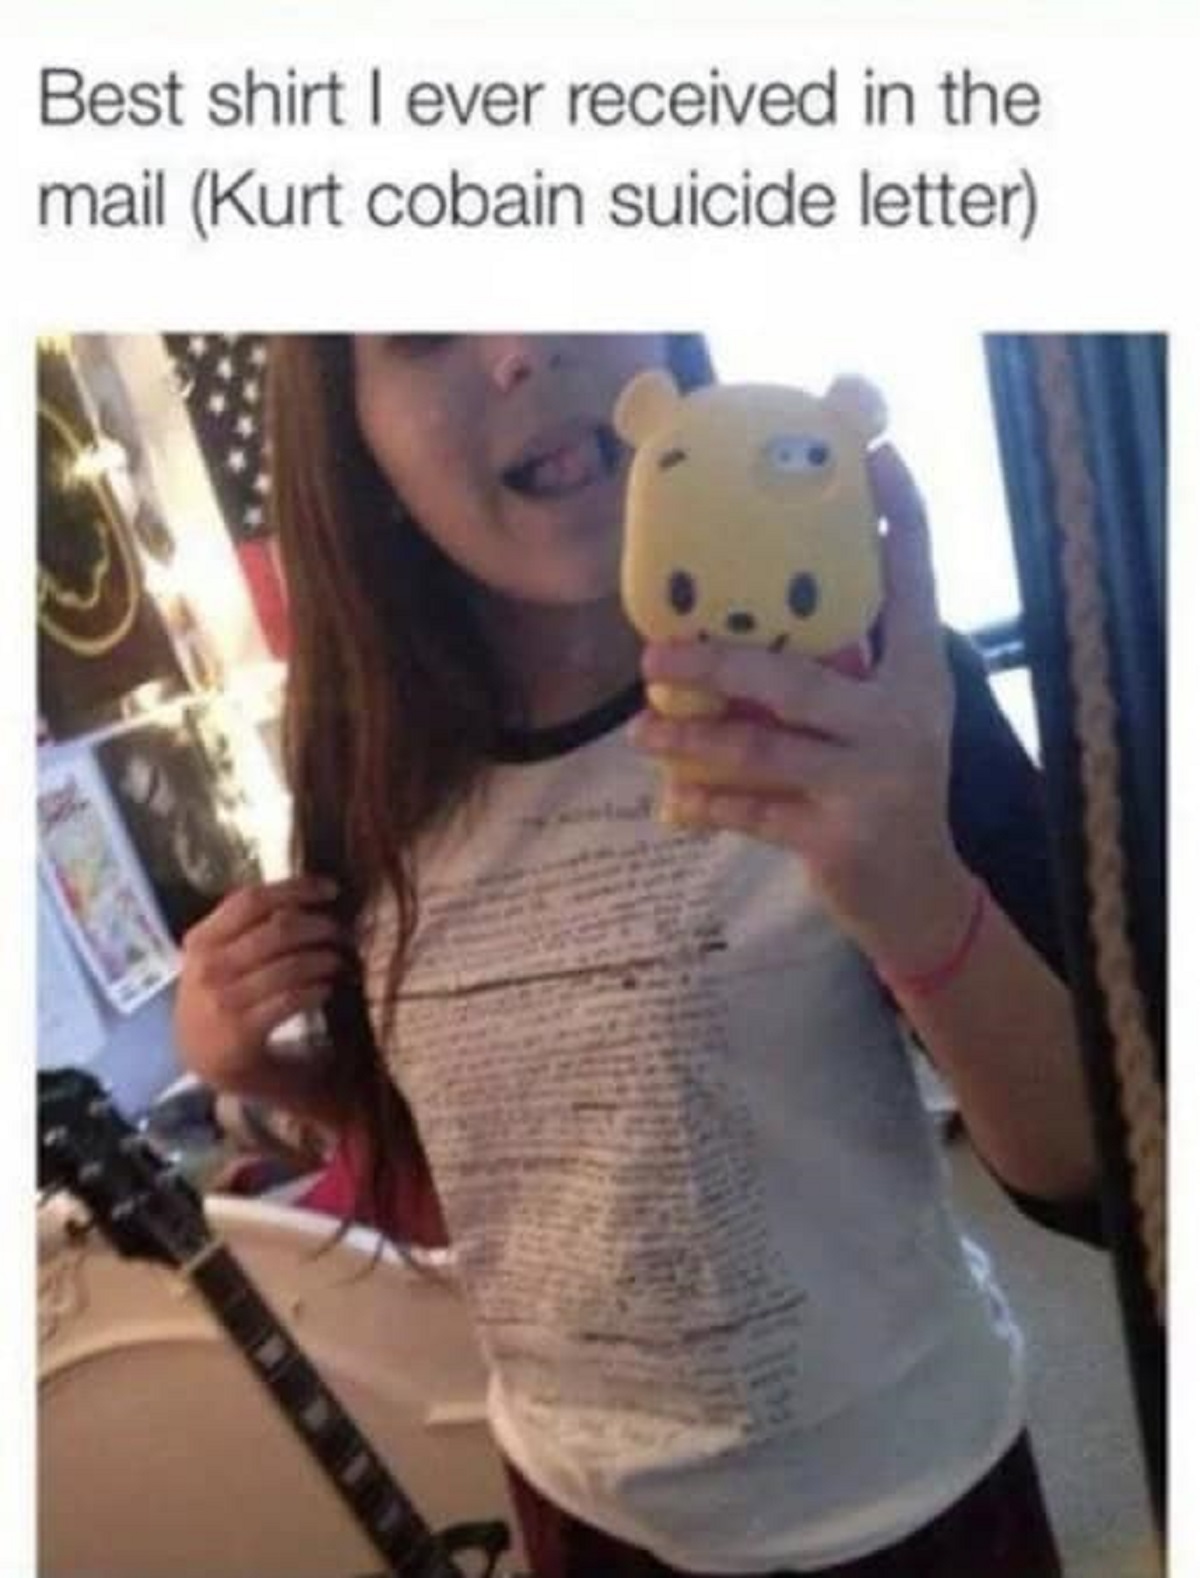 weird things on the internet - Best shirt I ever received in the mail Kurt cobain suicide letter